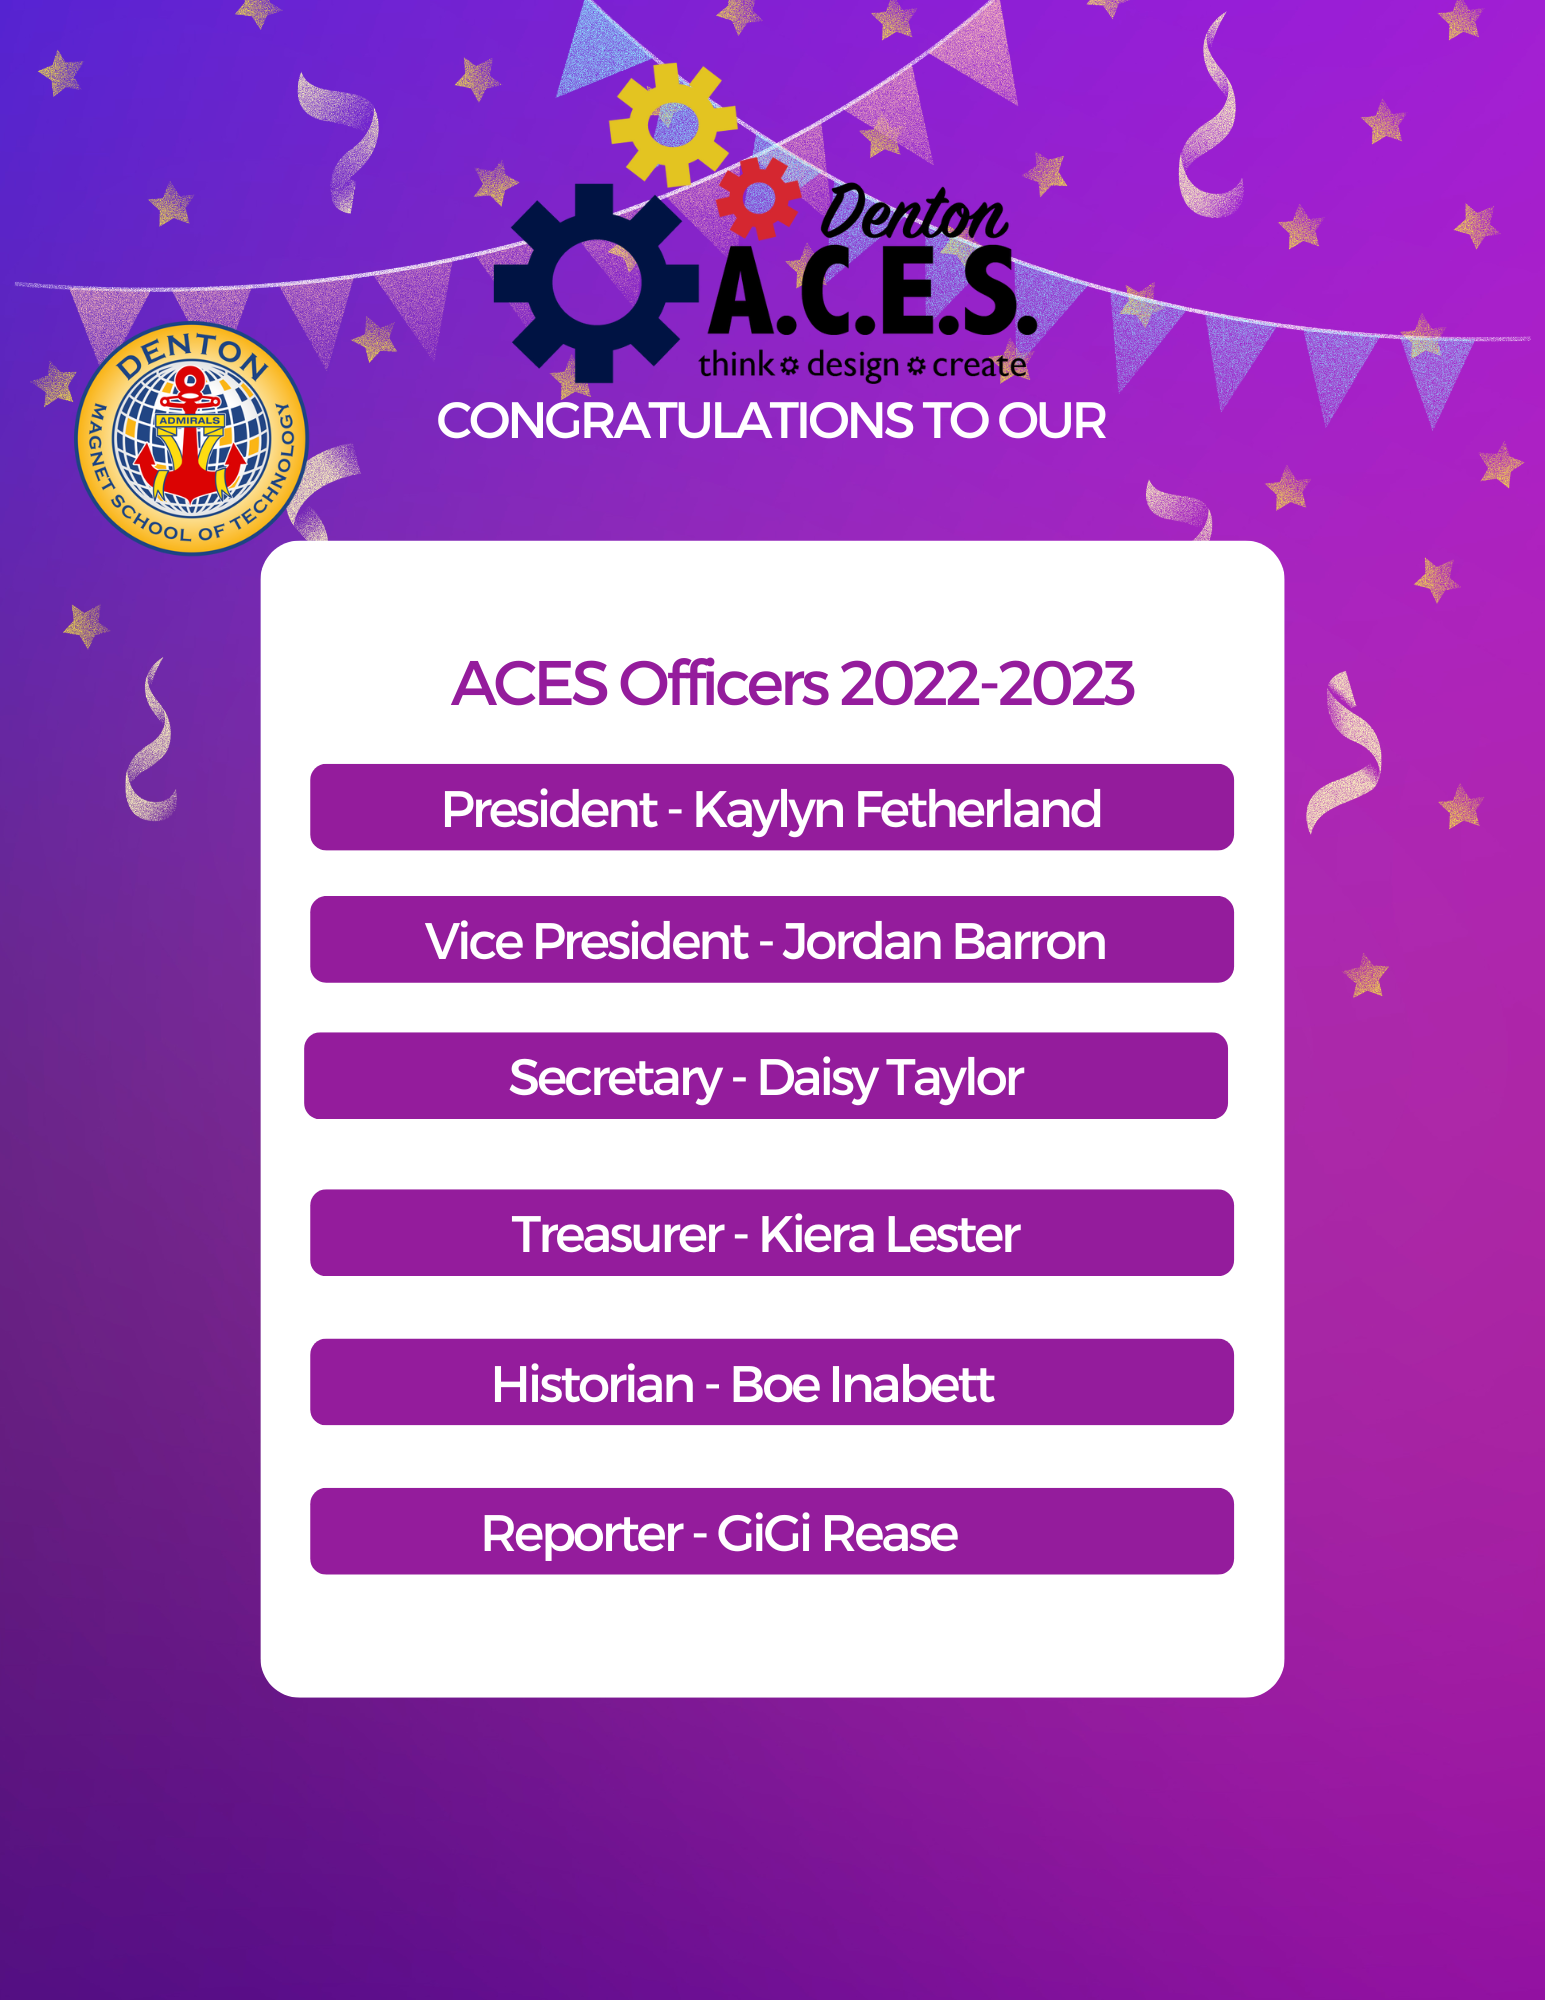 ACES officers